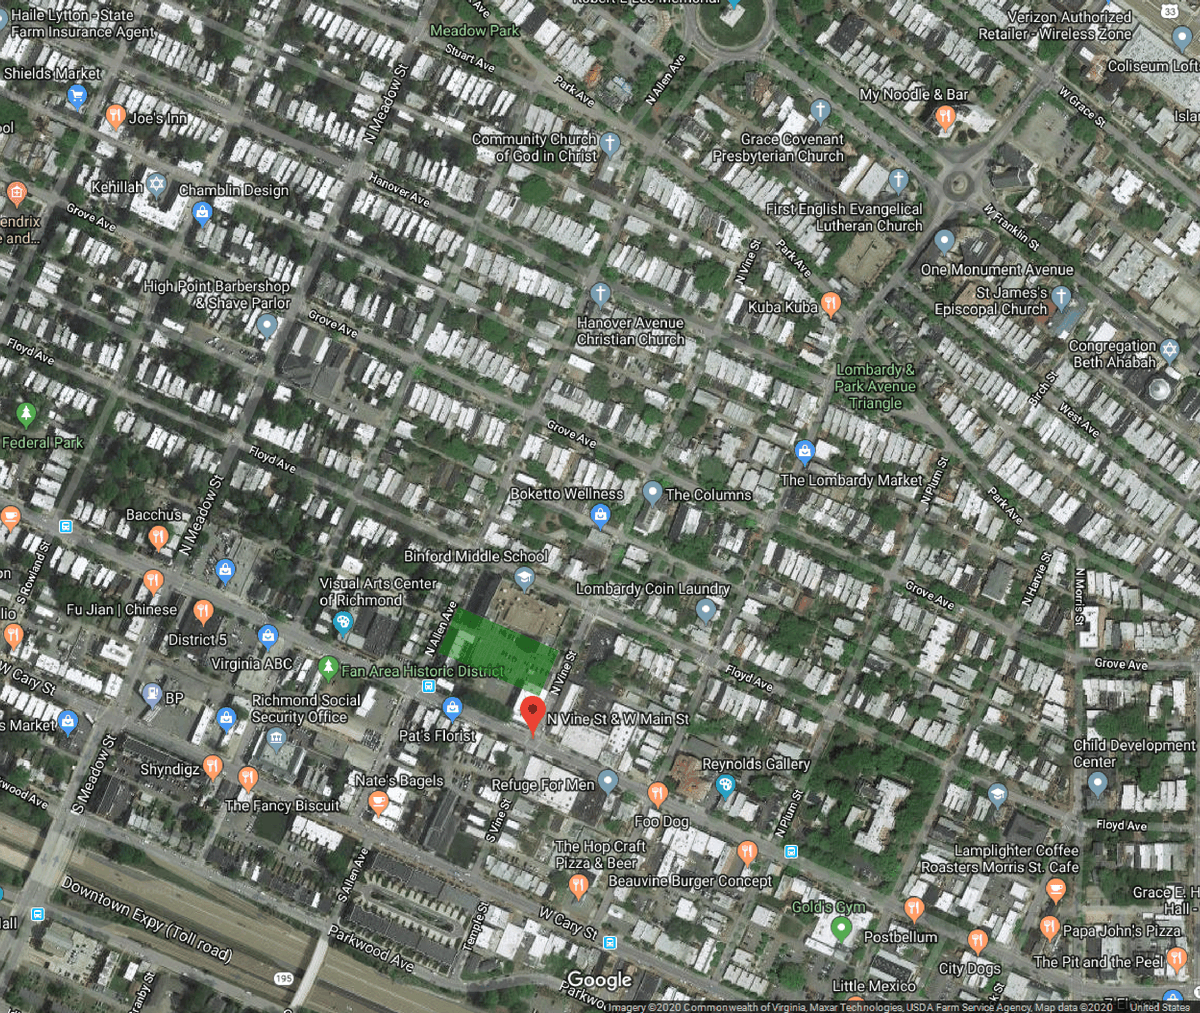  #ForgottenFields West End Park in Richmond was only home to a professional baseball team from 1894-1896 and UNC played a football game there each of those years (and maybe 1897). (Field orientation estimated.)